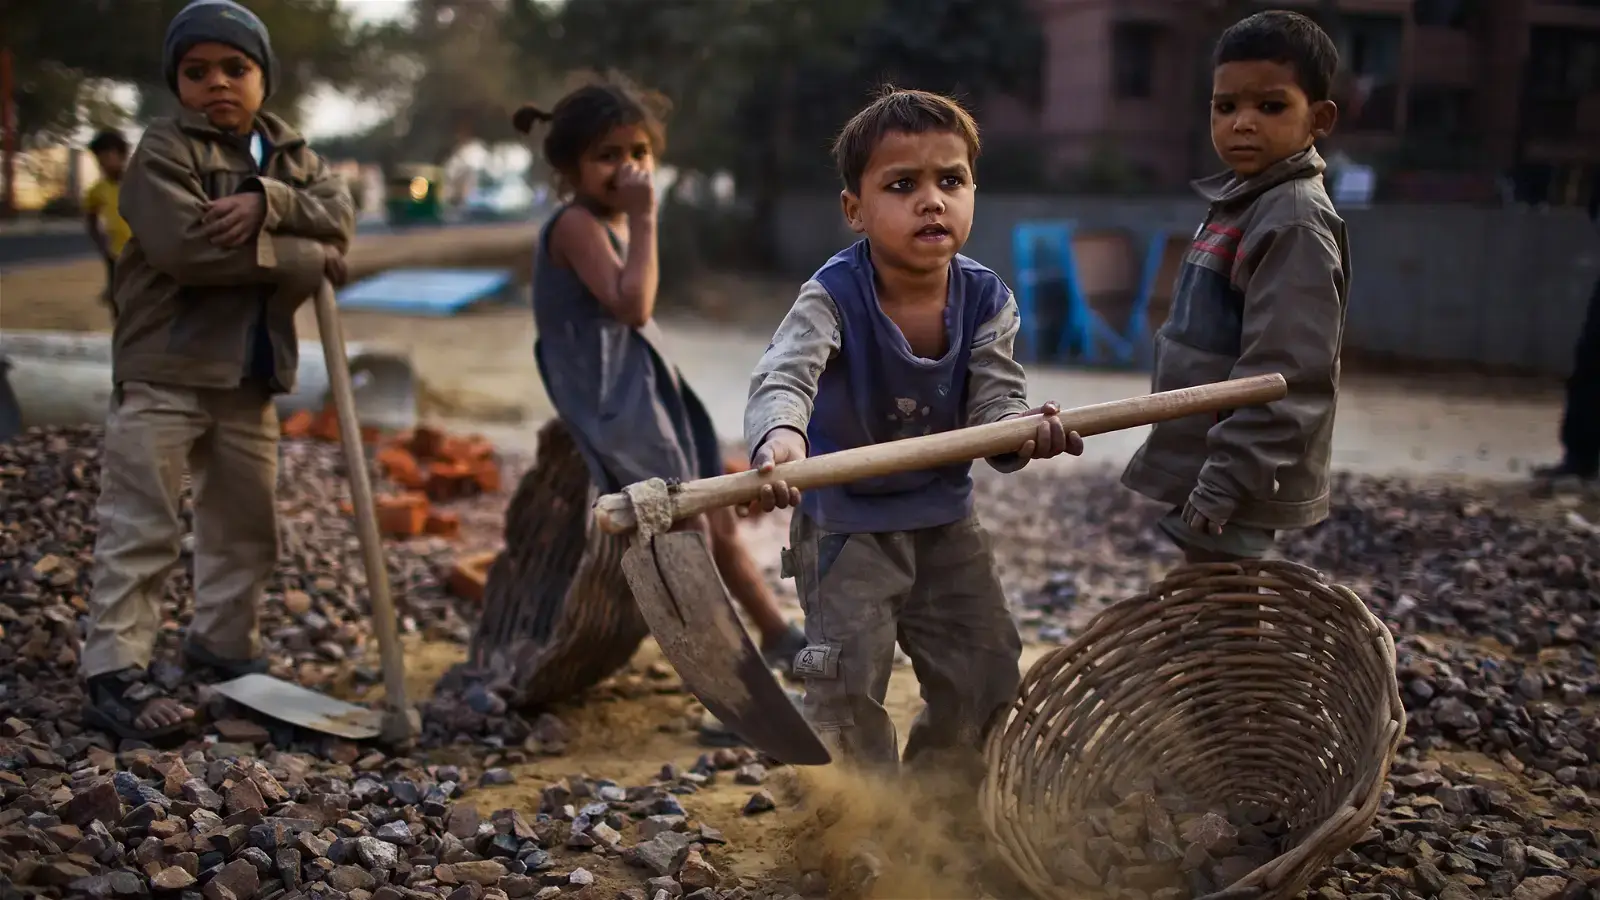 Illegal child labor is on the rise in a tight job market